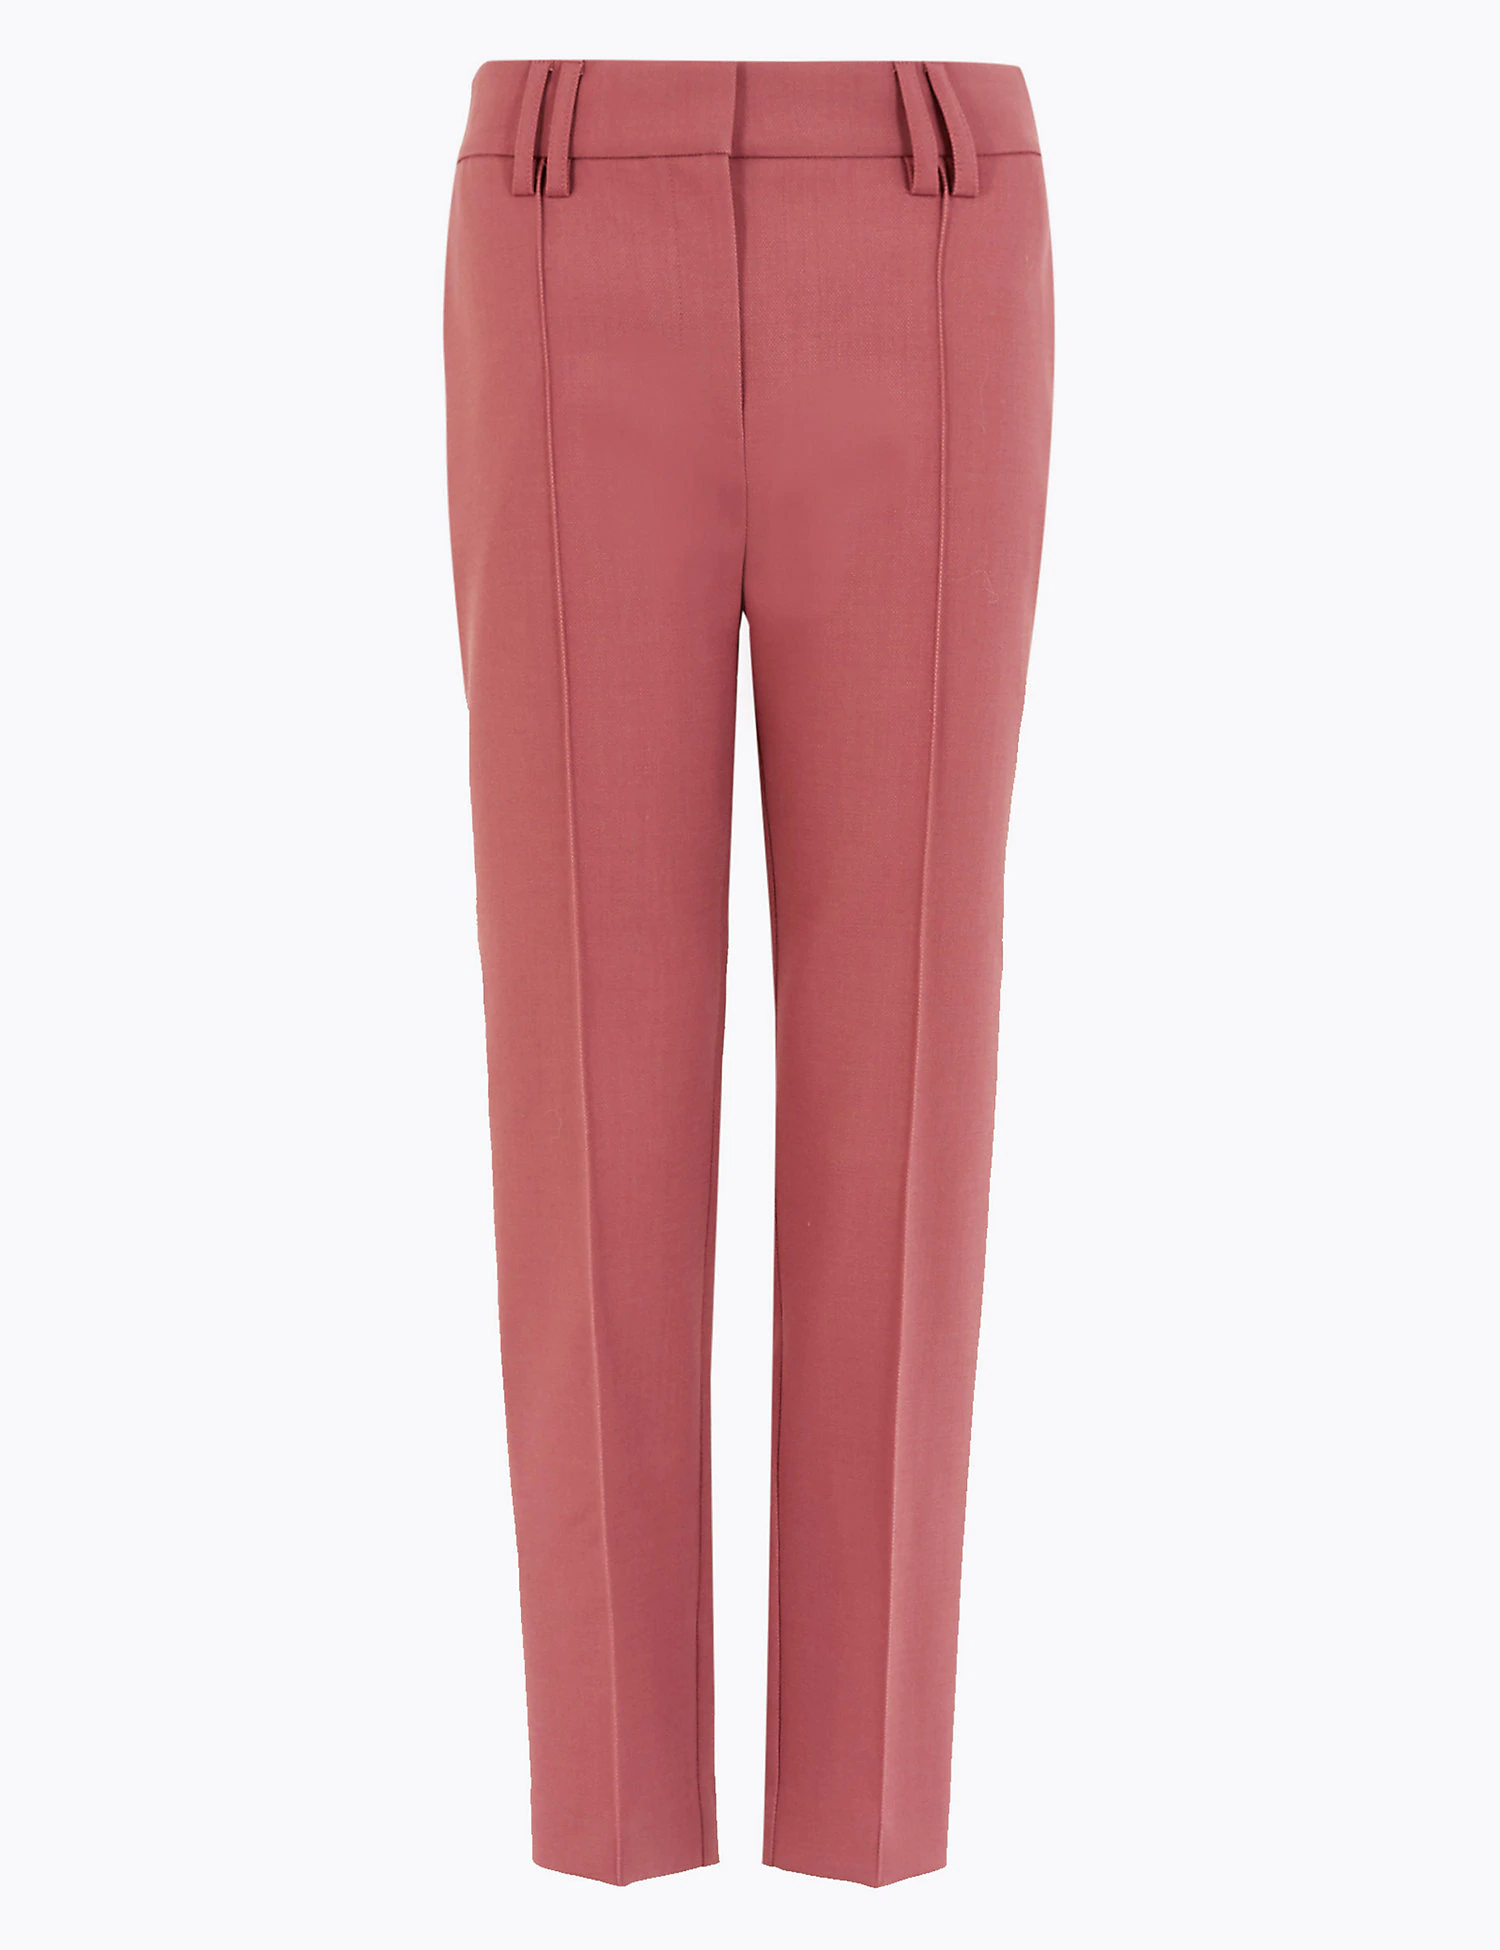 Marks and Spencer pants